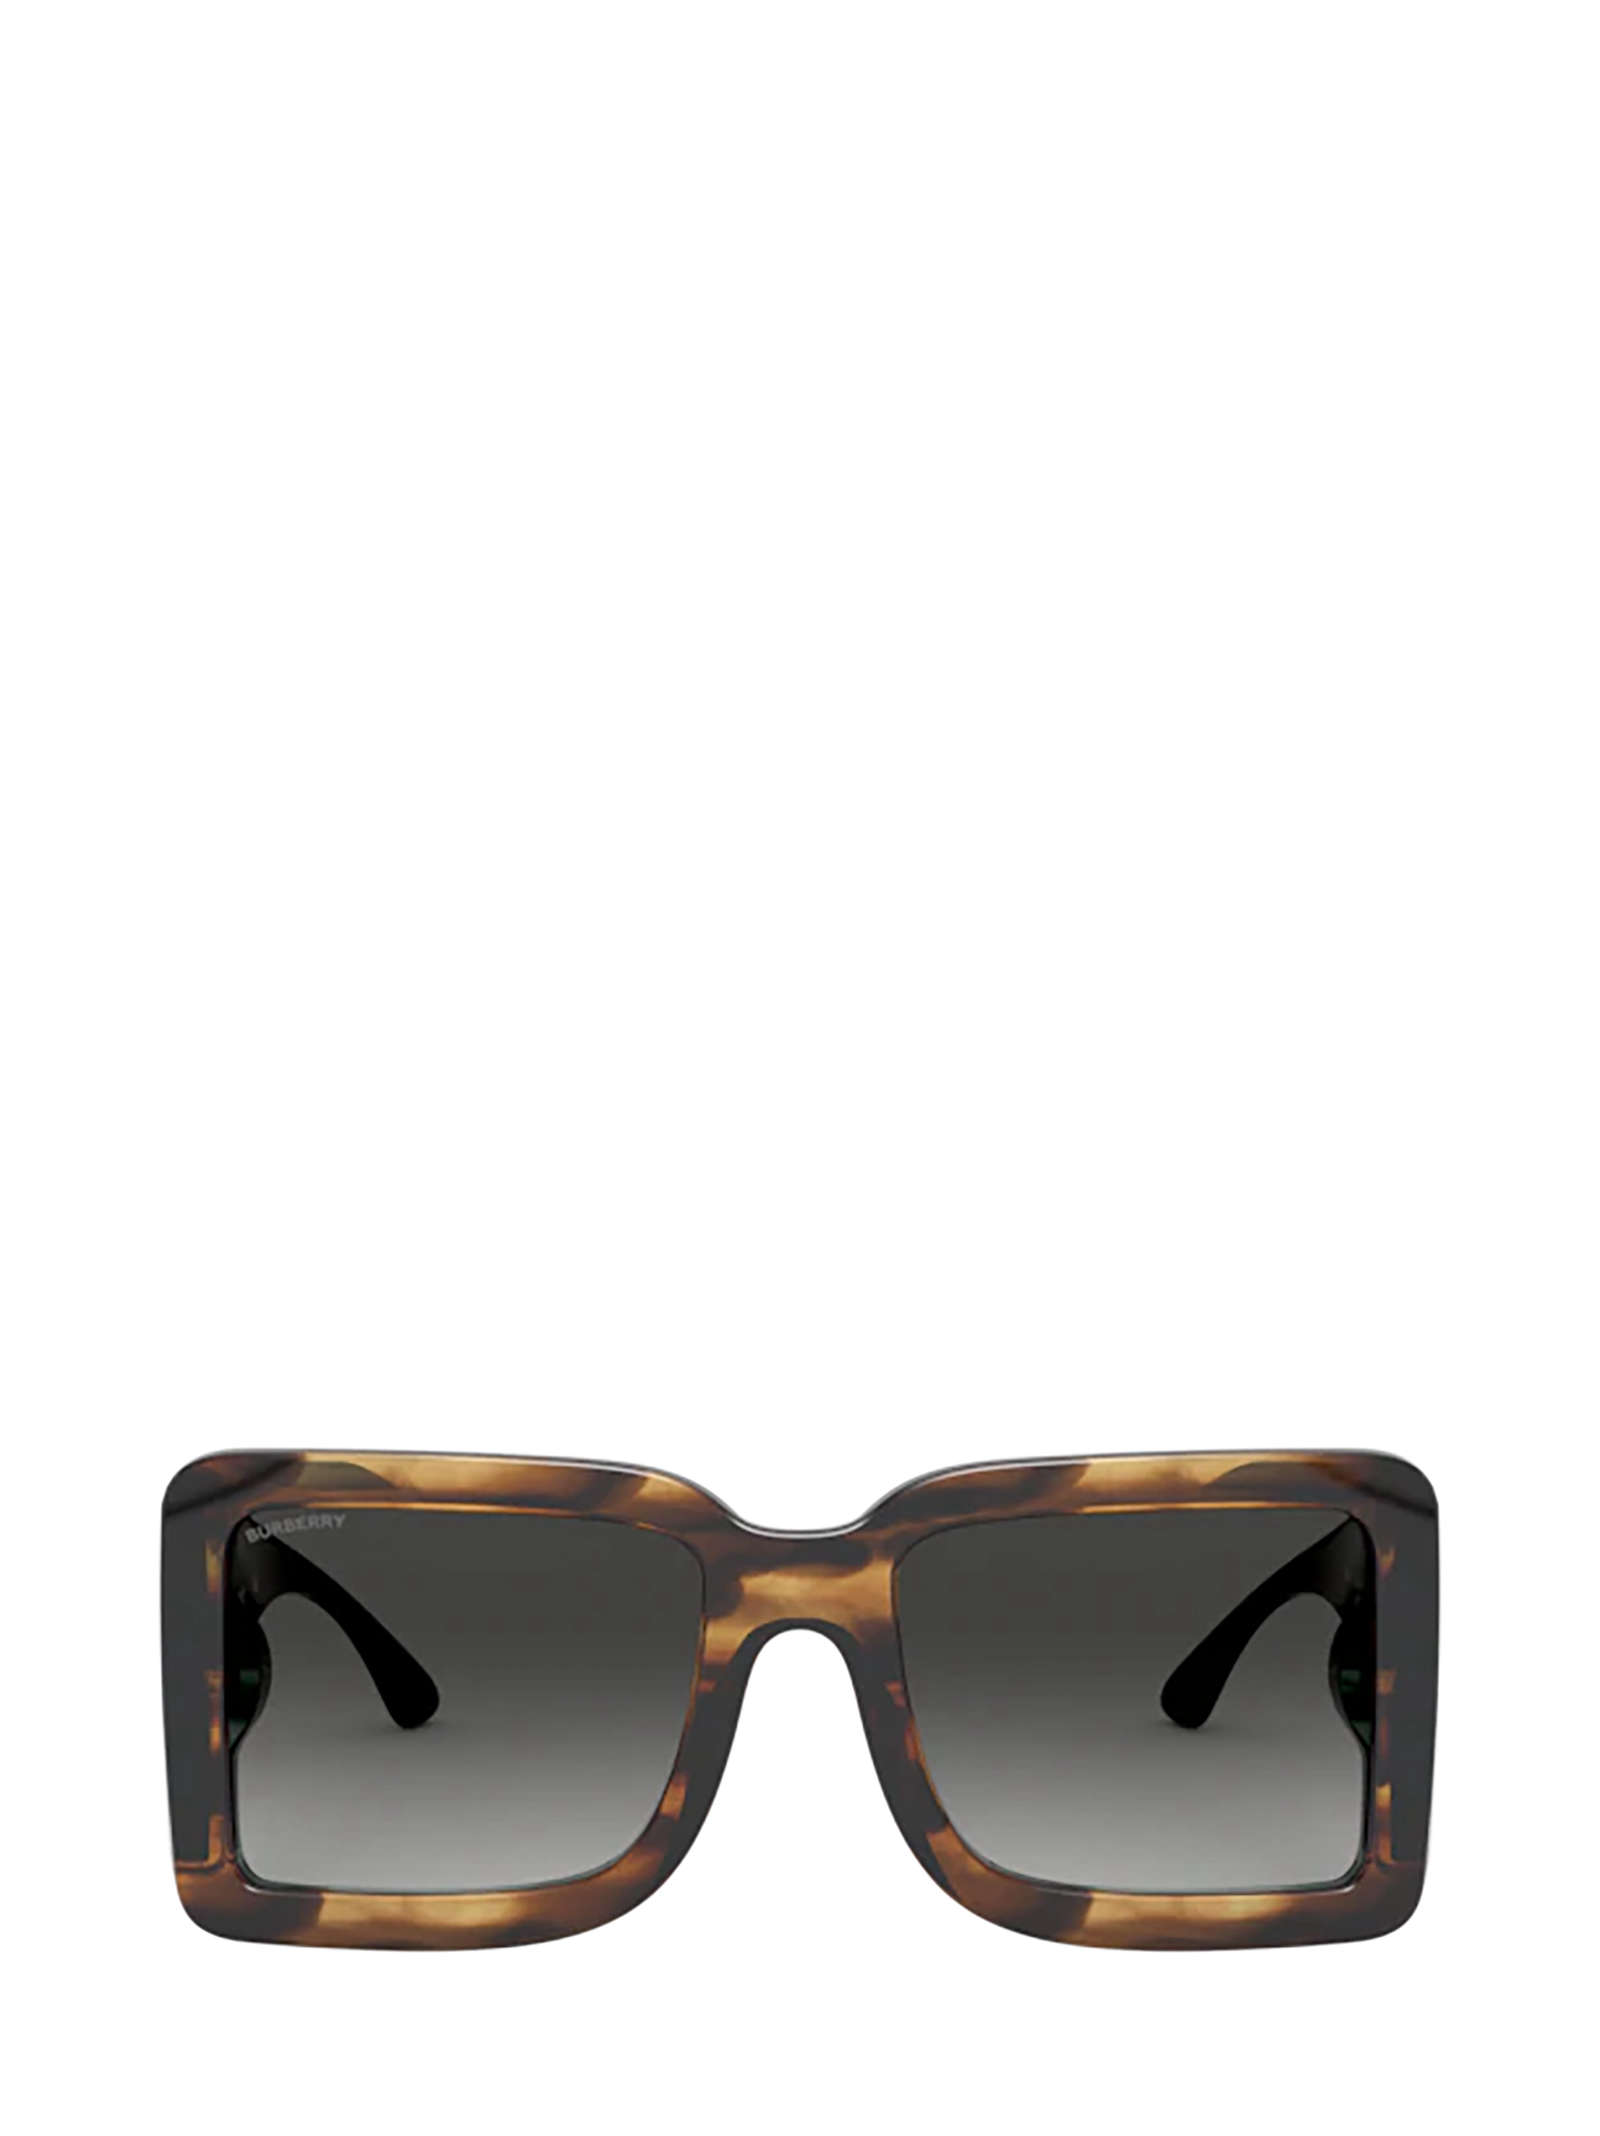 BURBERRY BE4312 BROWN SUNGLASSES,11715980